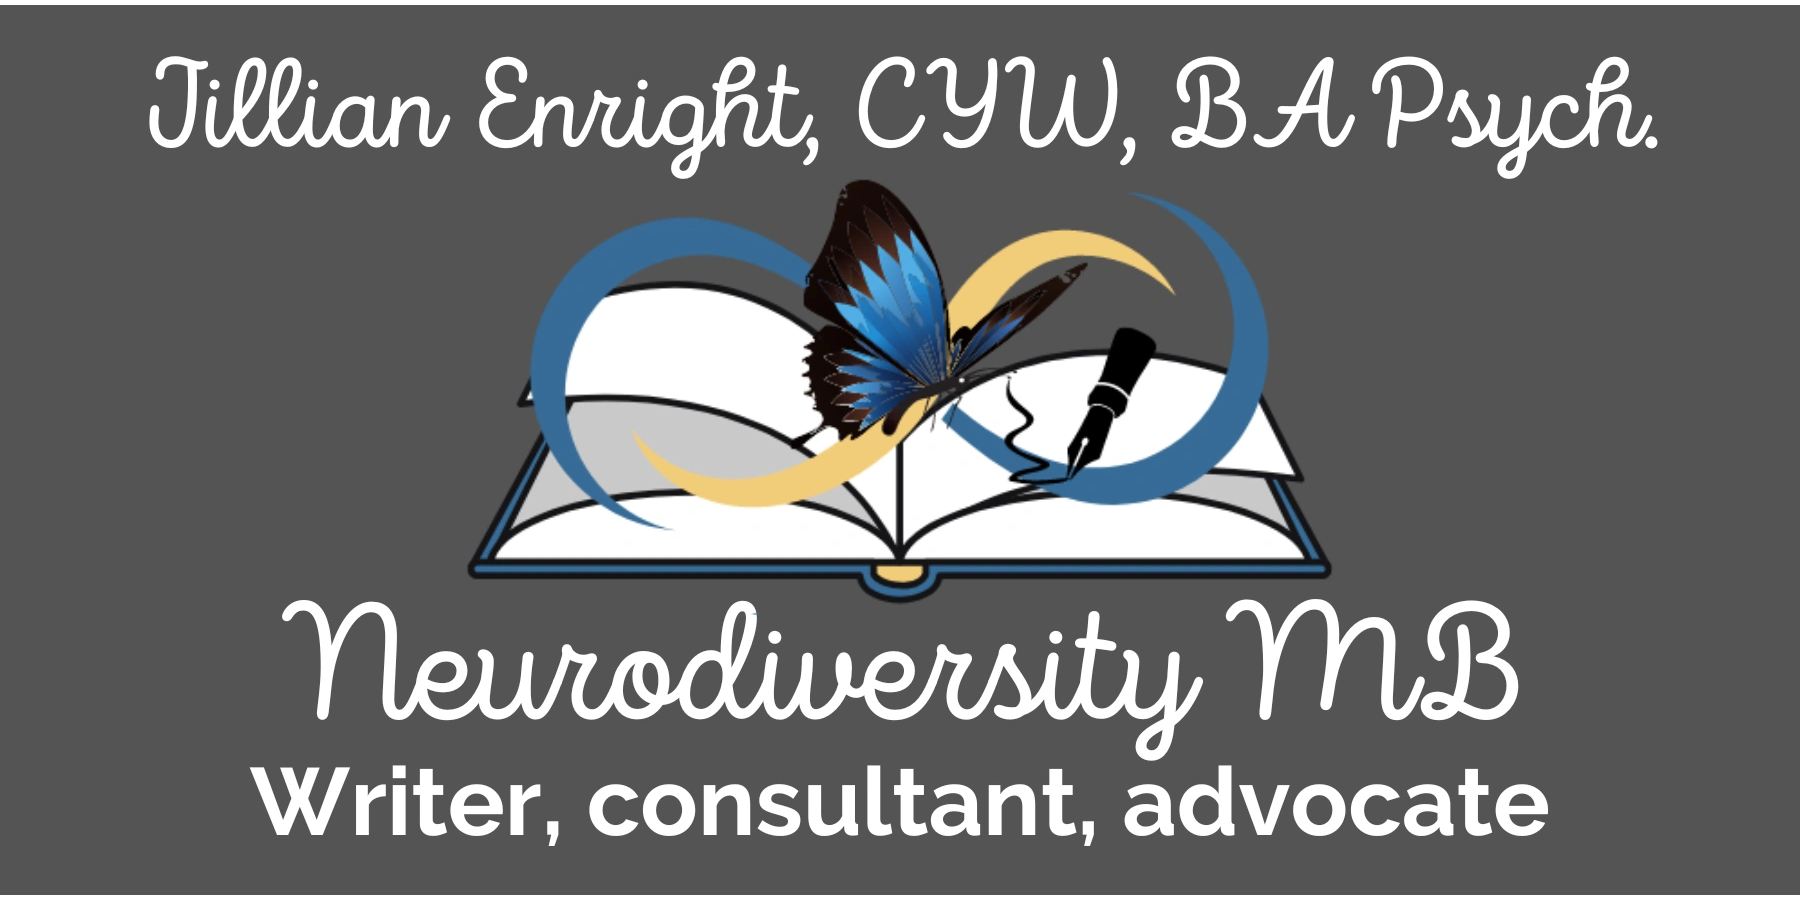 Jillian Enright: Writer, consultant, advocate, and neurodiversity-affirming autism & ADHD Coach